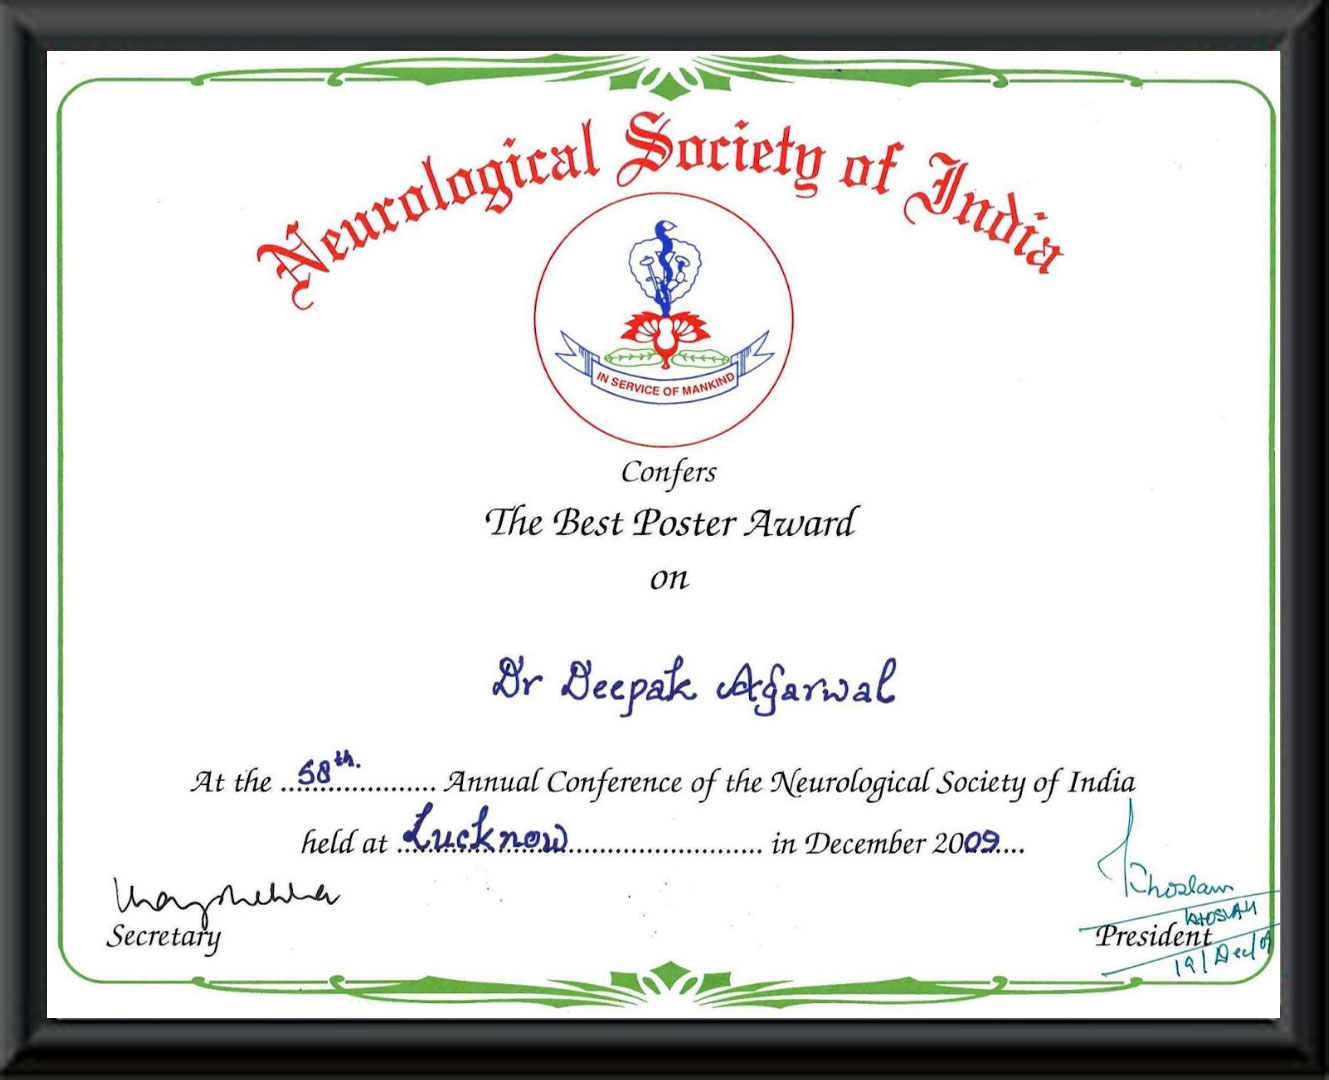 BEST POSTER AWARD BY NEUROLOGICAL SOCIETY OF INDIA